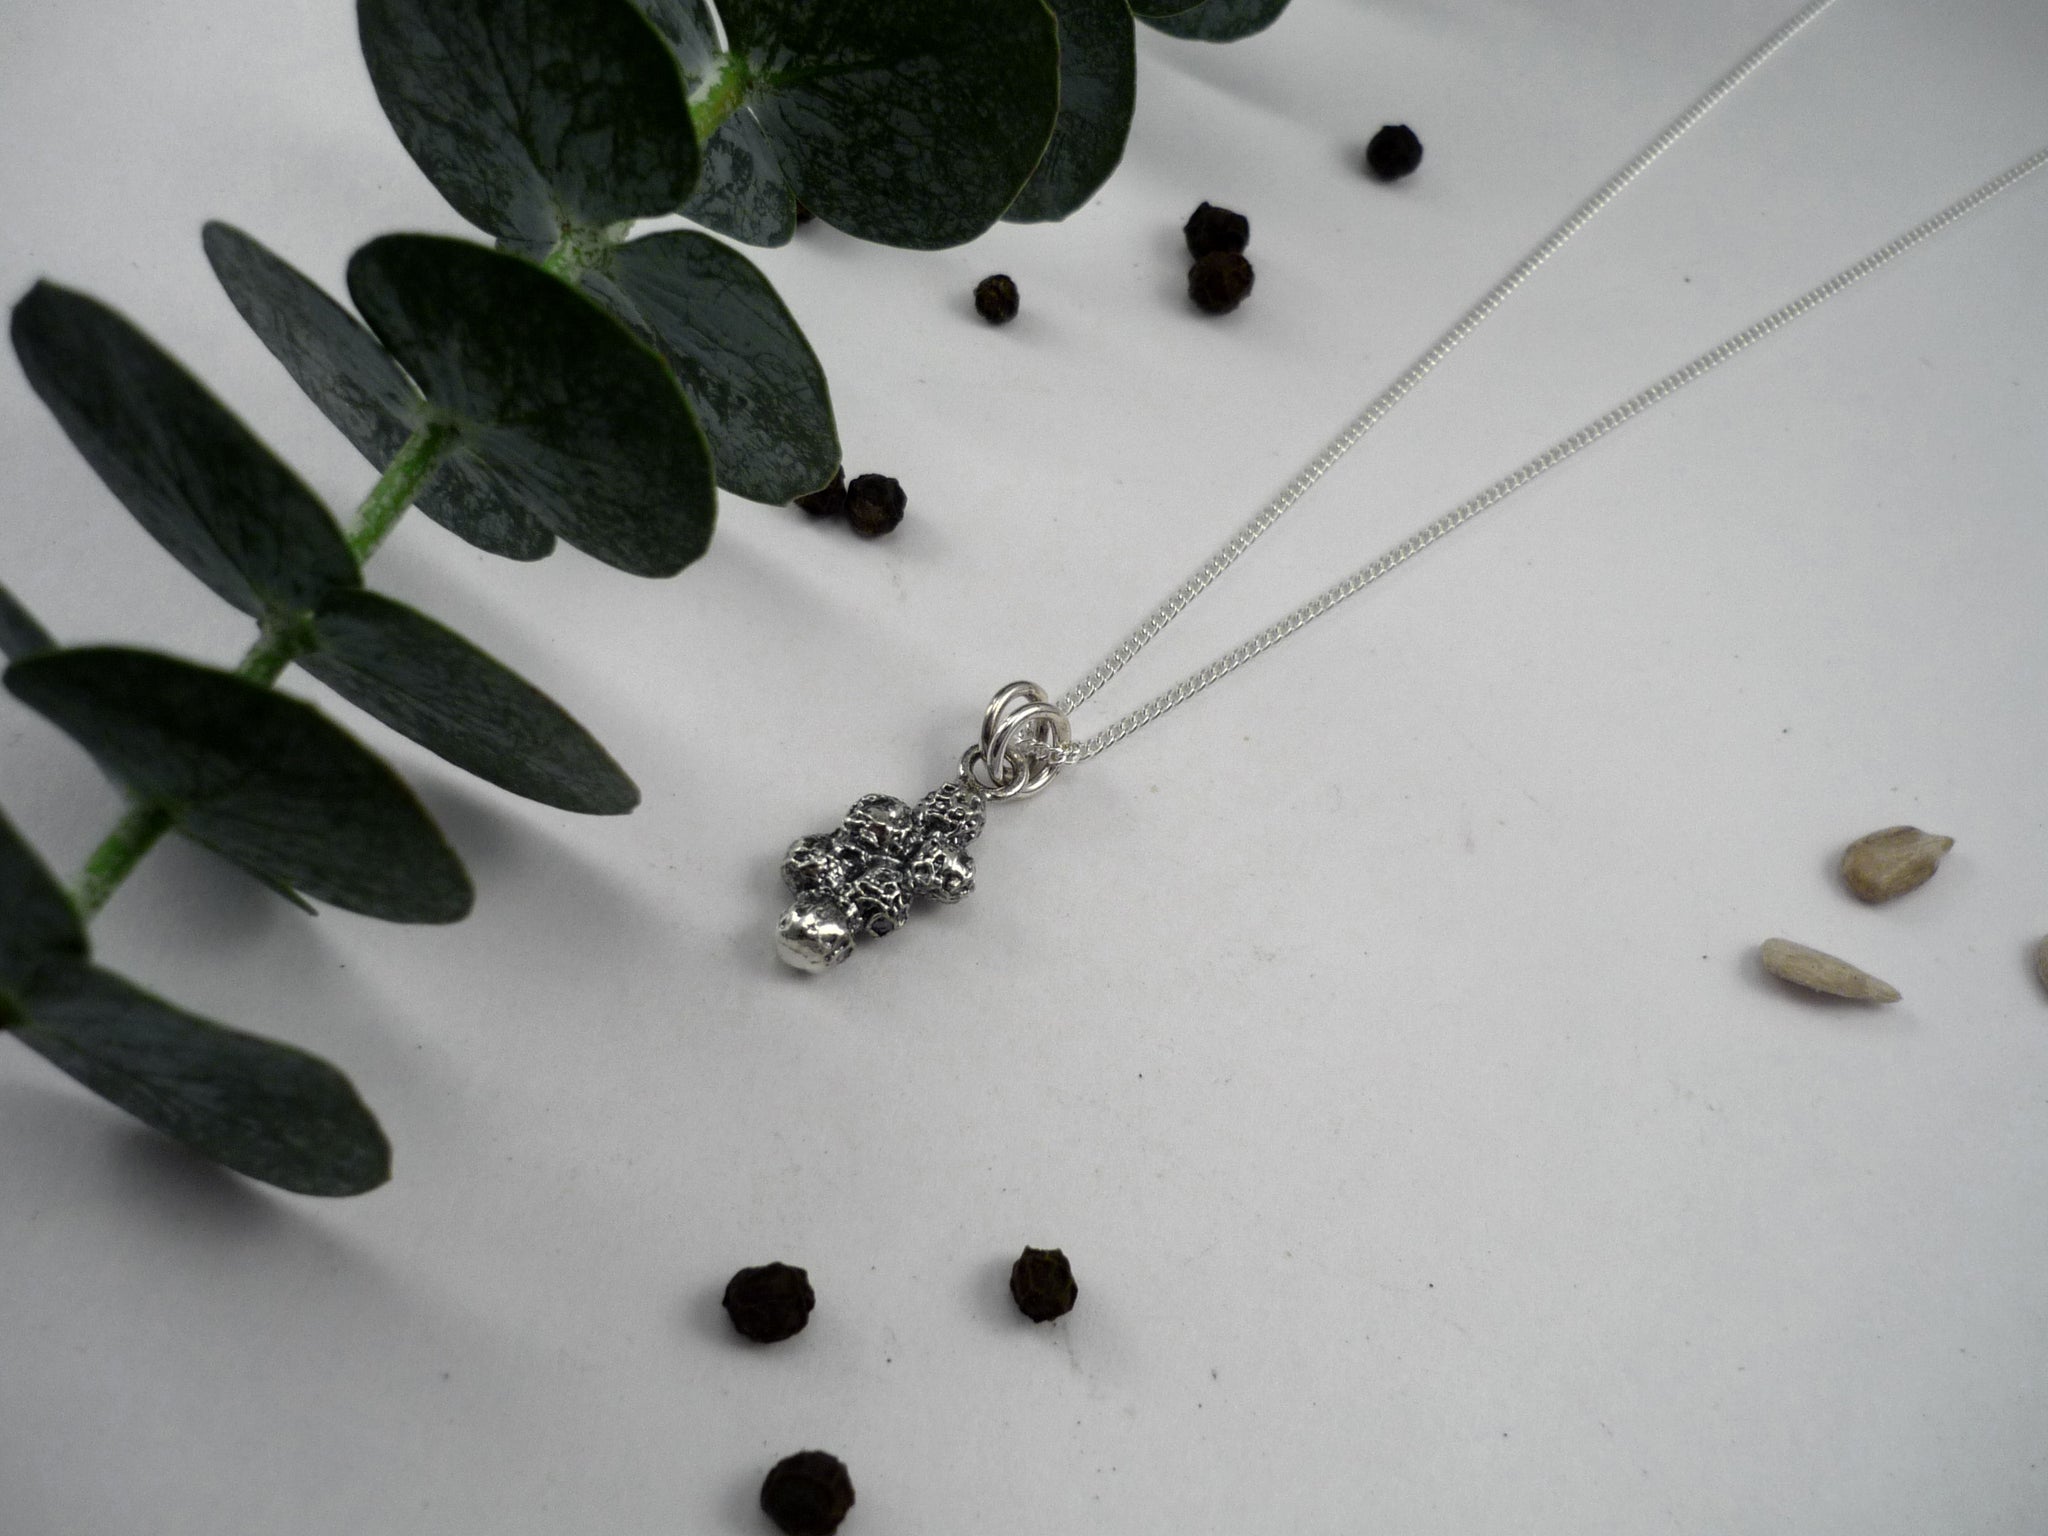 PEPPER POND, sterling silver pendant inspired by peppercorns!